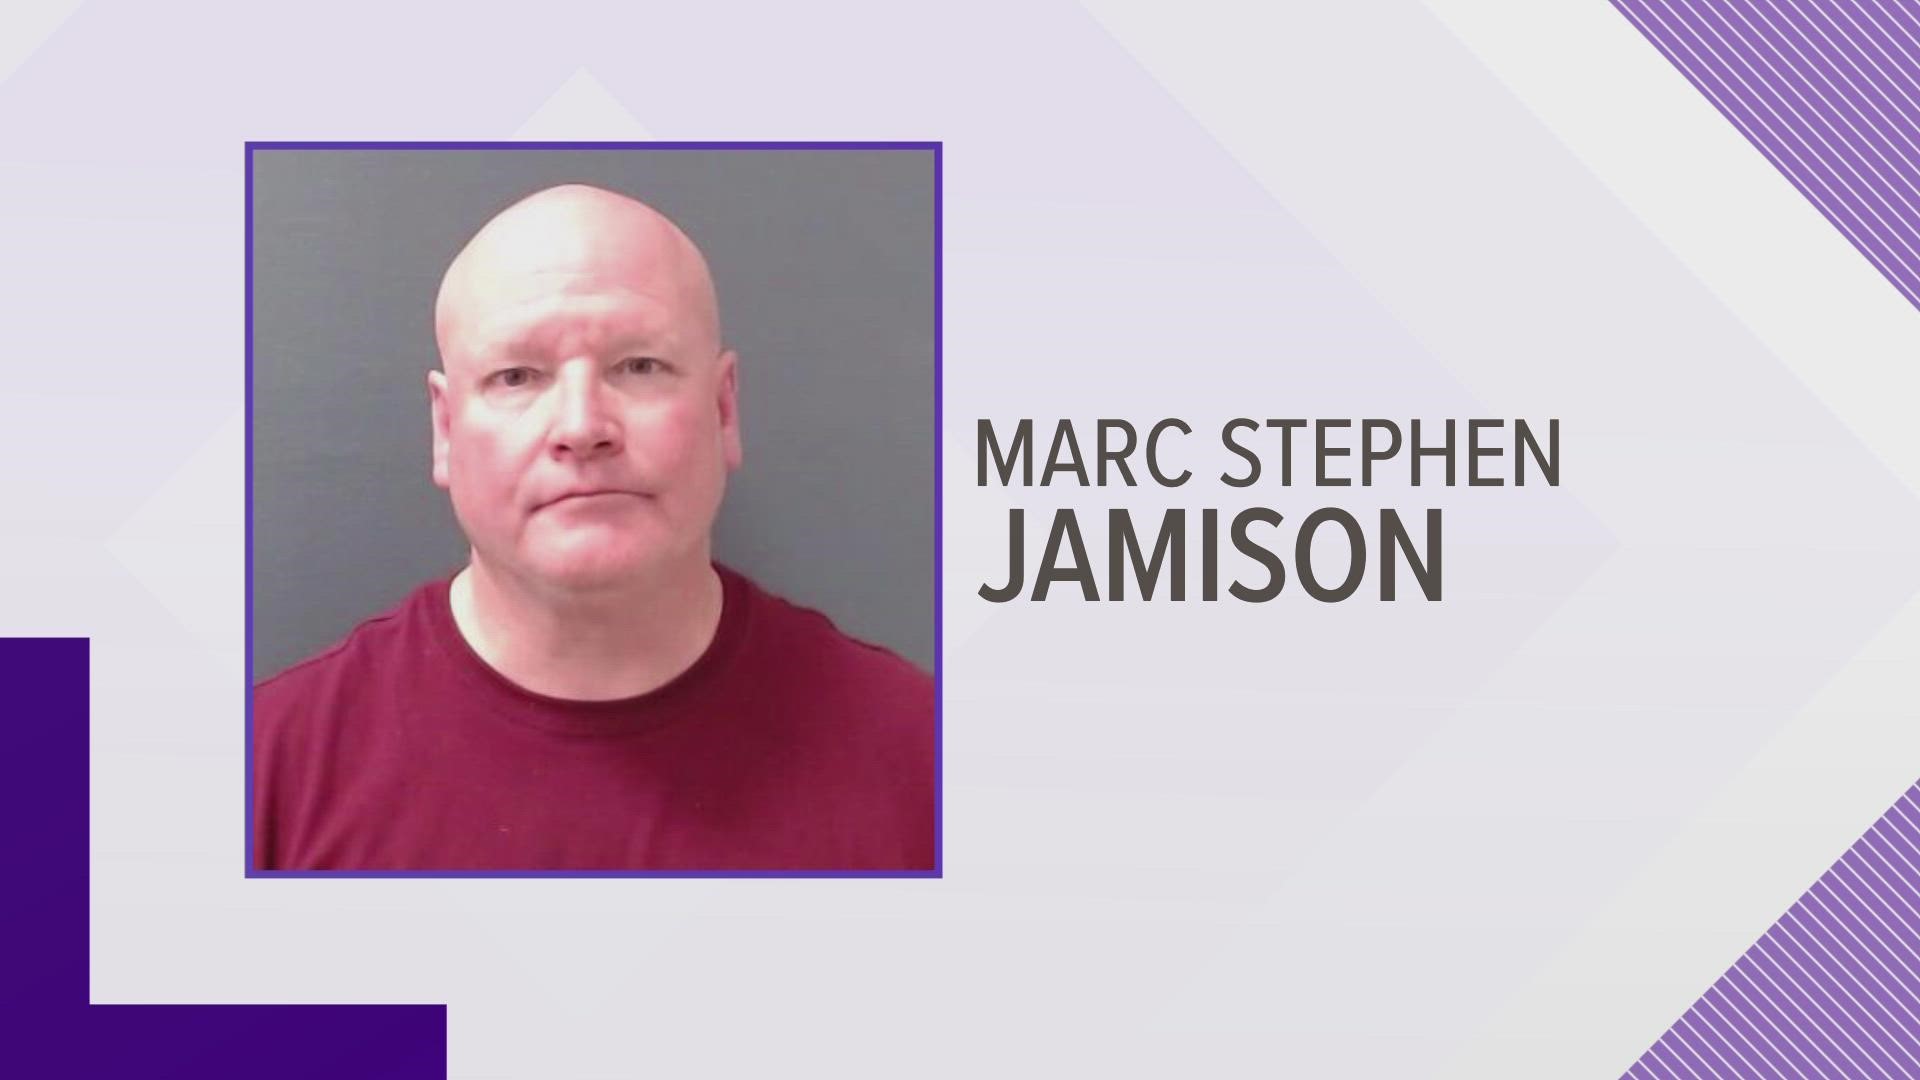 Marc Stephen Jamison, 58, was taken into custody on Friday on accusations of trafficking a 16-year-old girl.